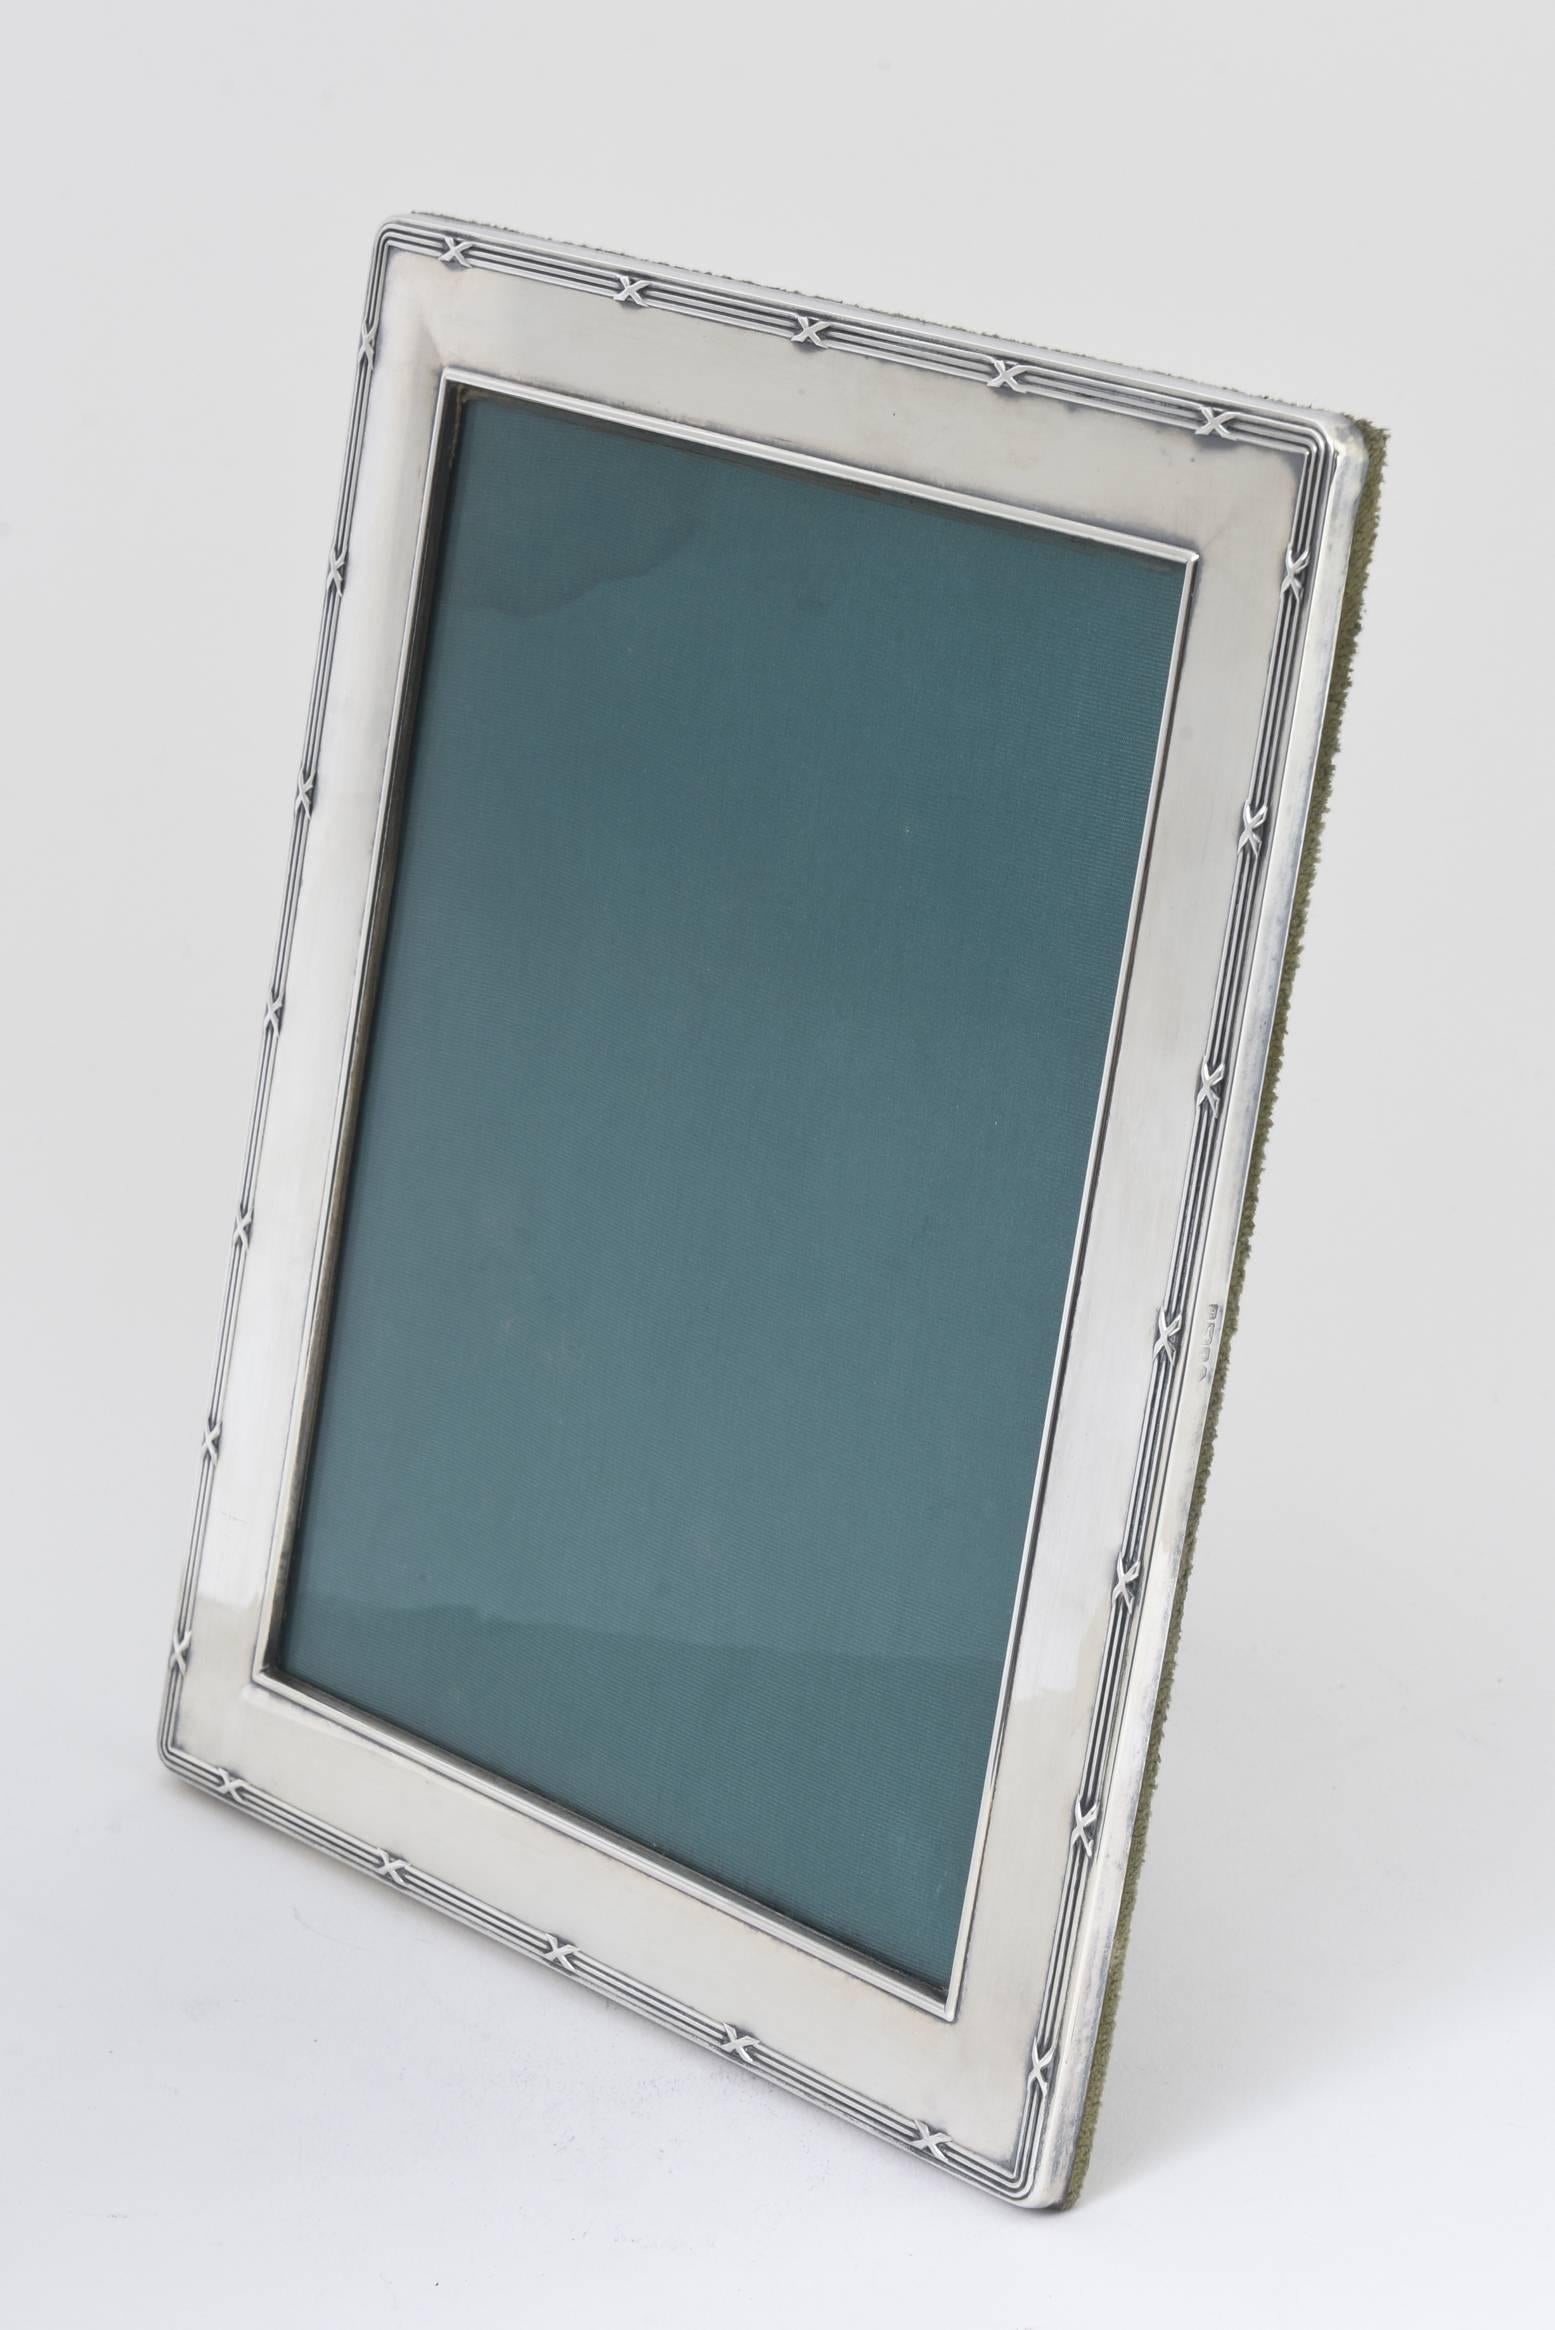 Elegant English picture frame by Carrs of Sheffield featuring a simple border of three lines intersected by an “X”. Wood back covered in green velvet. Holds a photo 8” x 6” photo.